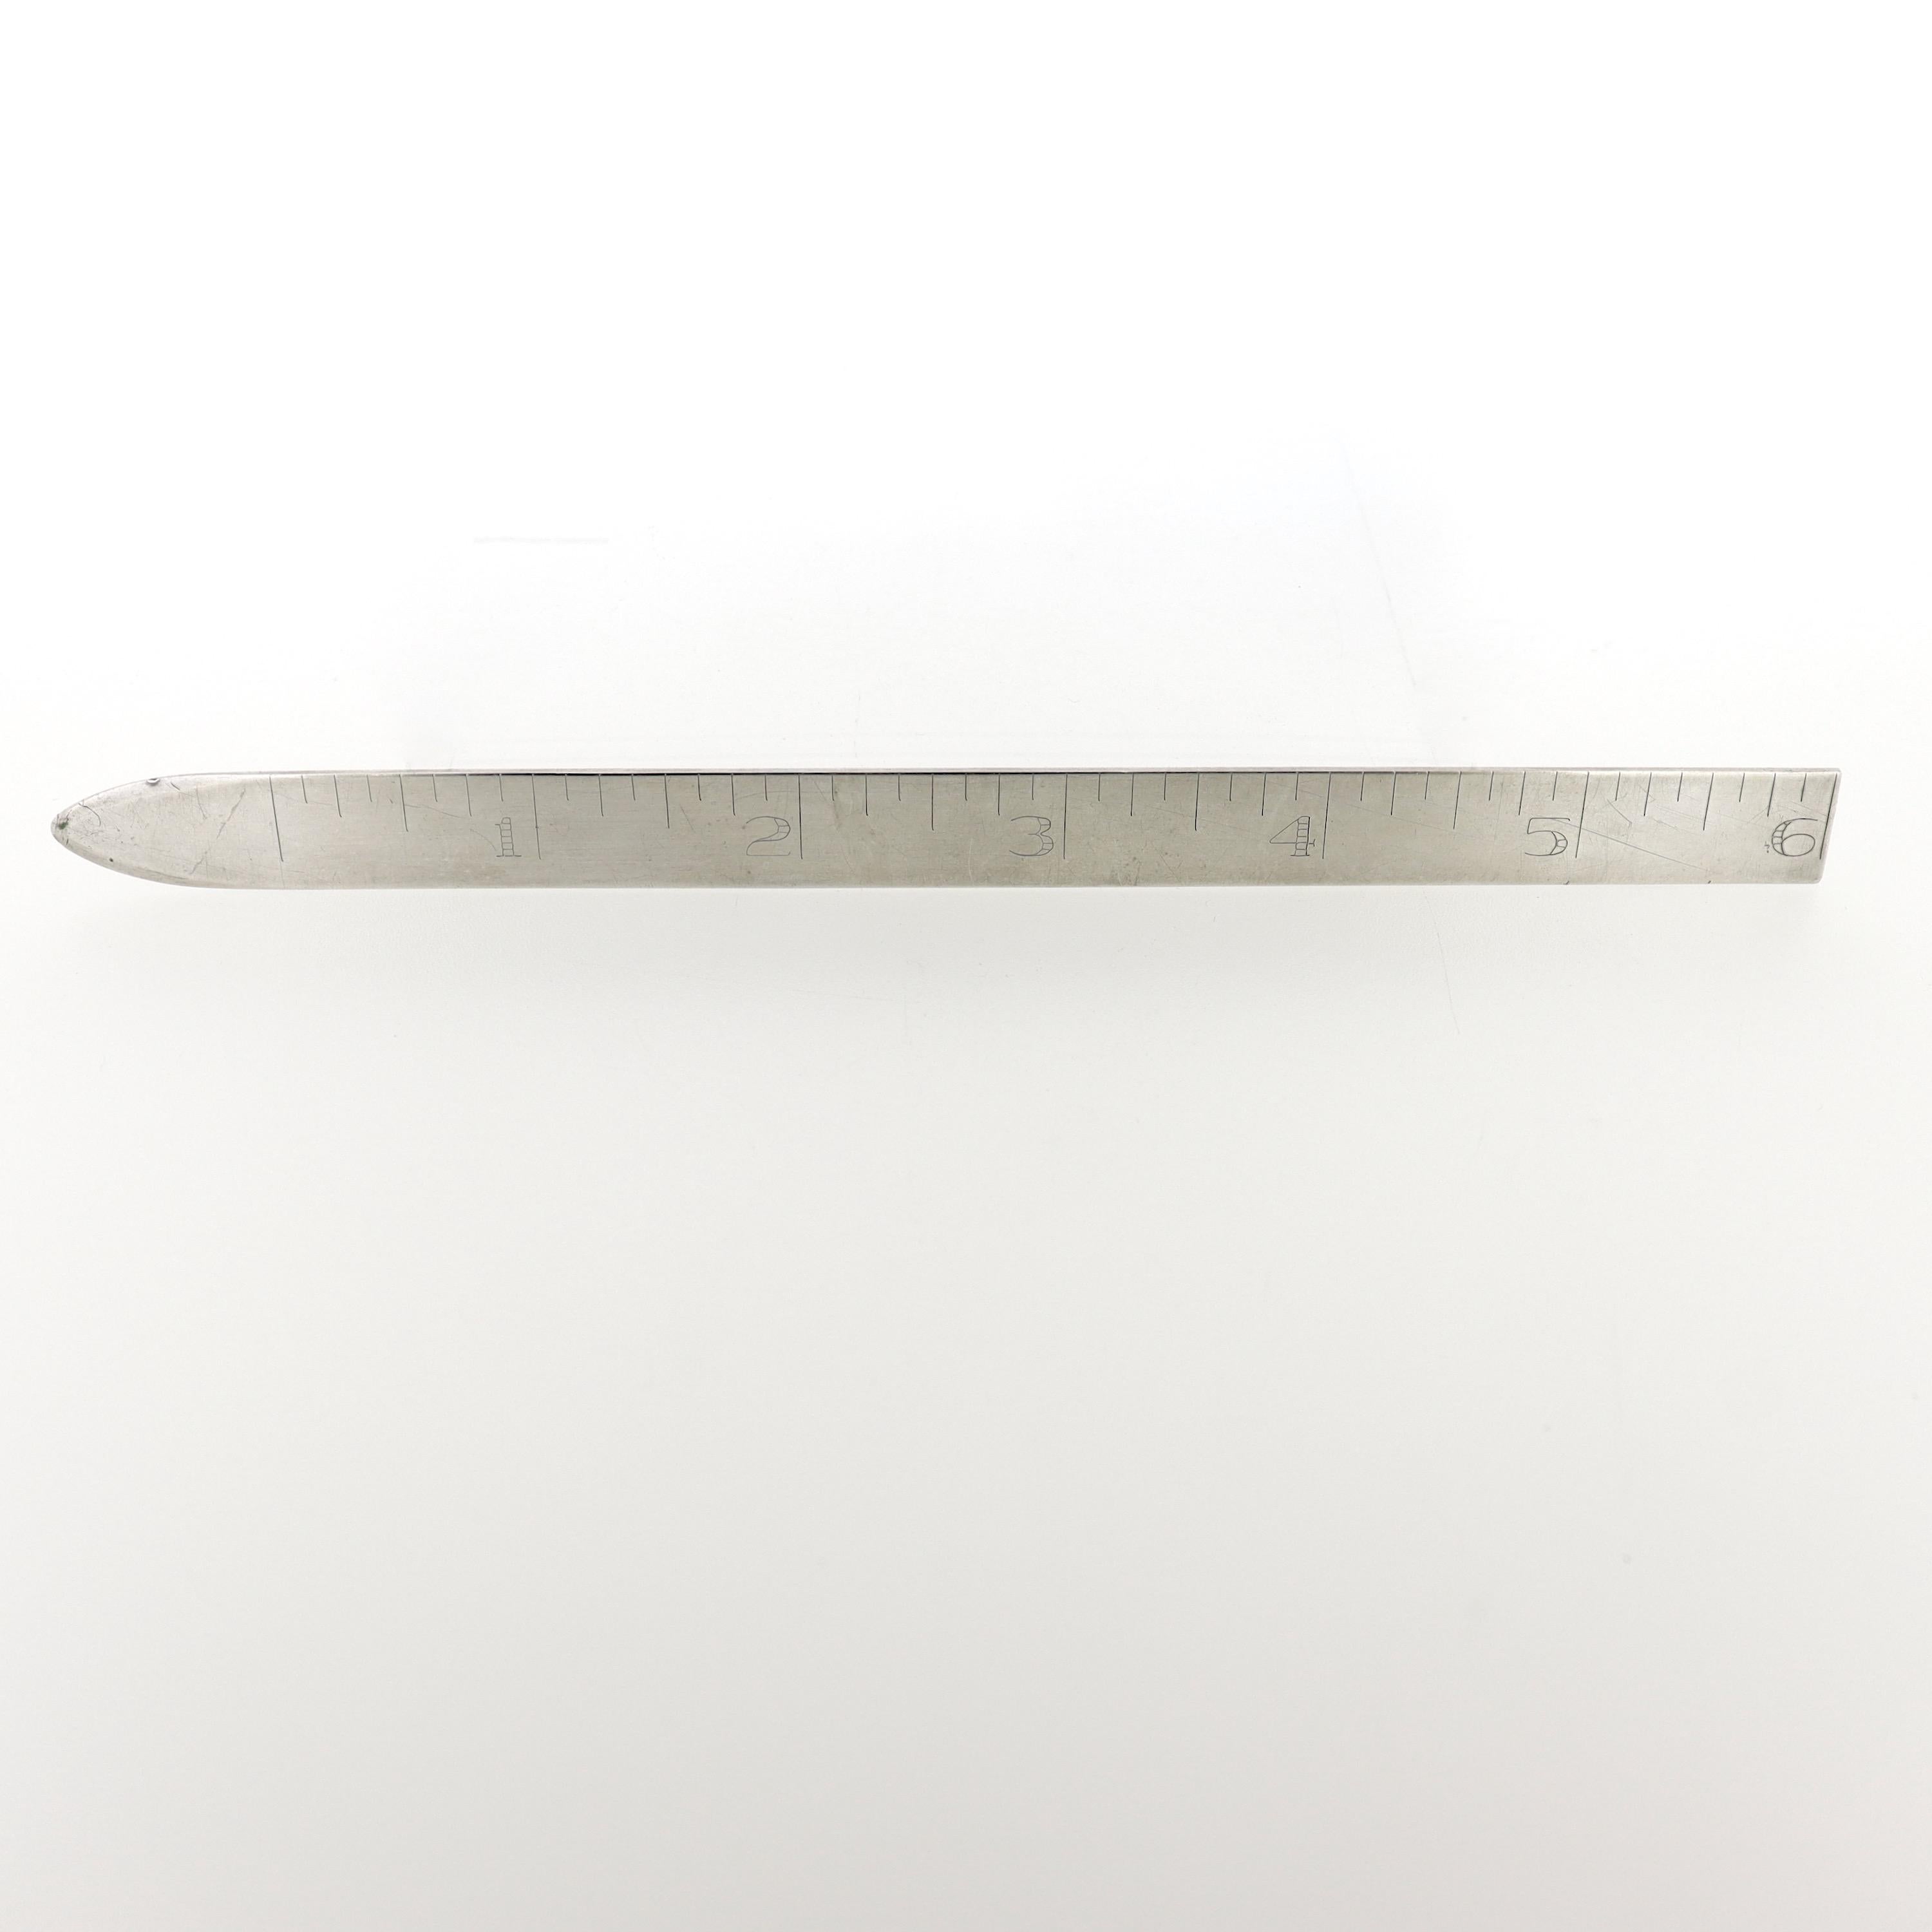 A fine antique sterling silver ruler.

By Leonore Doskow.

With a pointed end for opening letters and 6 inches of measurement marks.

Simply a great dual-purpose letter opener & ruler from Leonore Doskow!

Date:
20th Century

Overall Condition:
It